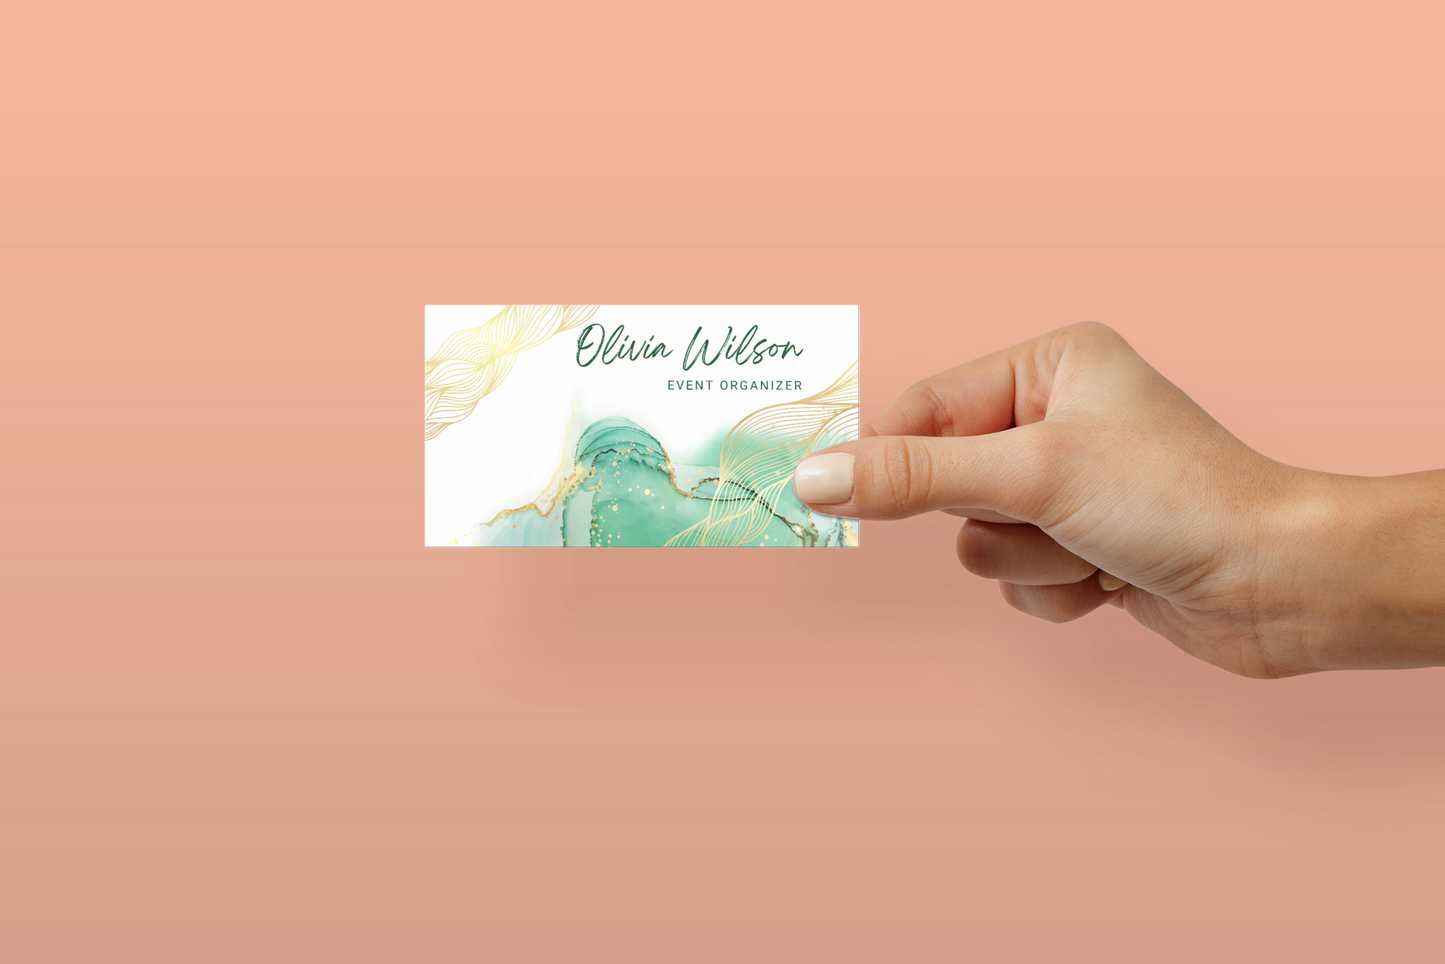 Custom Printed Business Cards with Glossy Finish, 2" x 3.5" U.S. Standard Size, Two-sided Printing